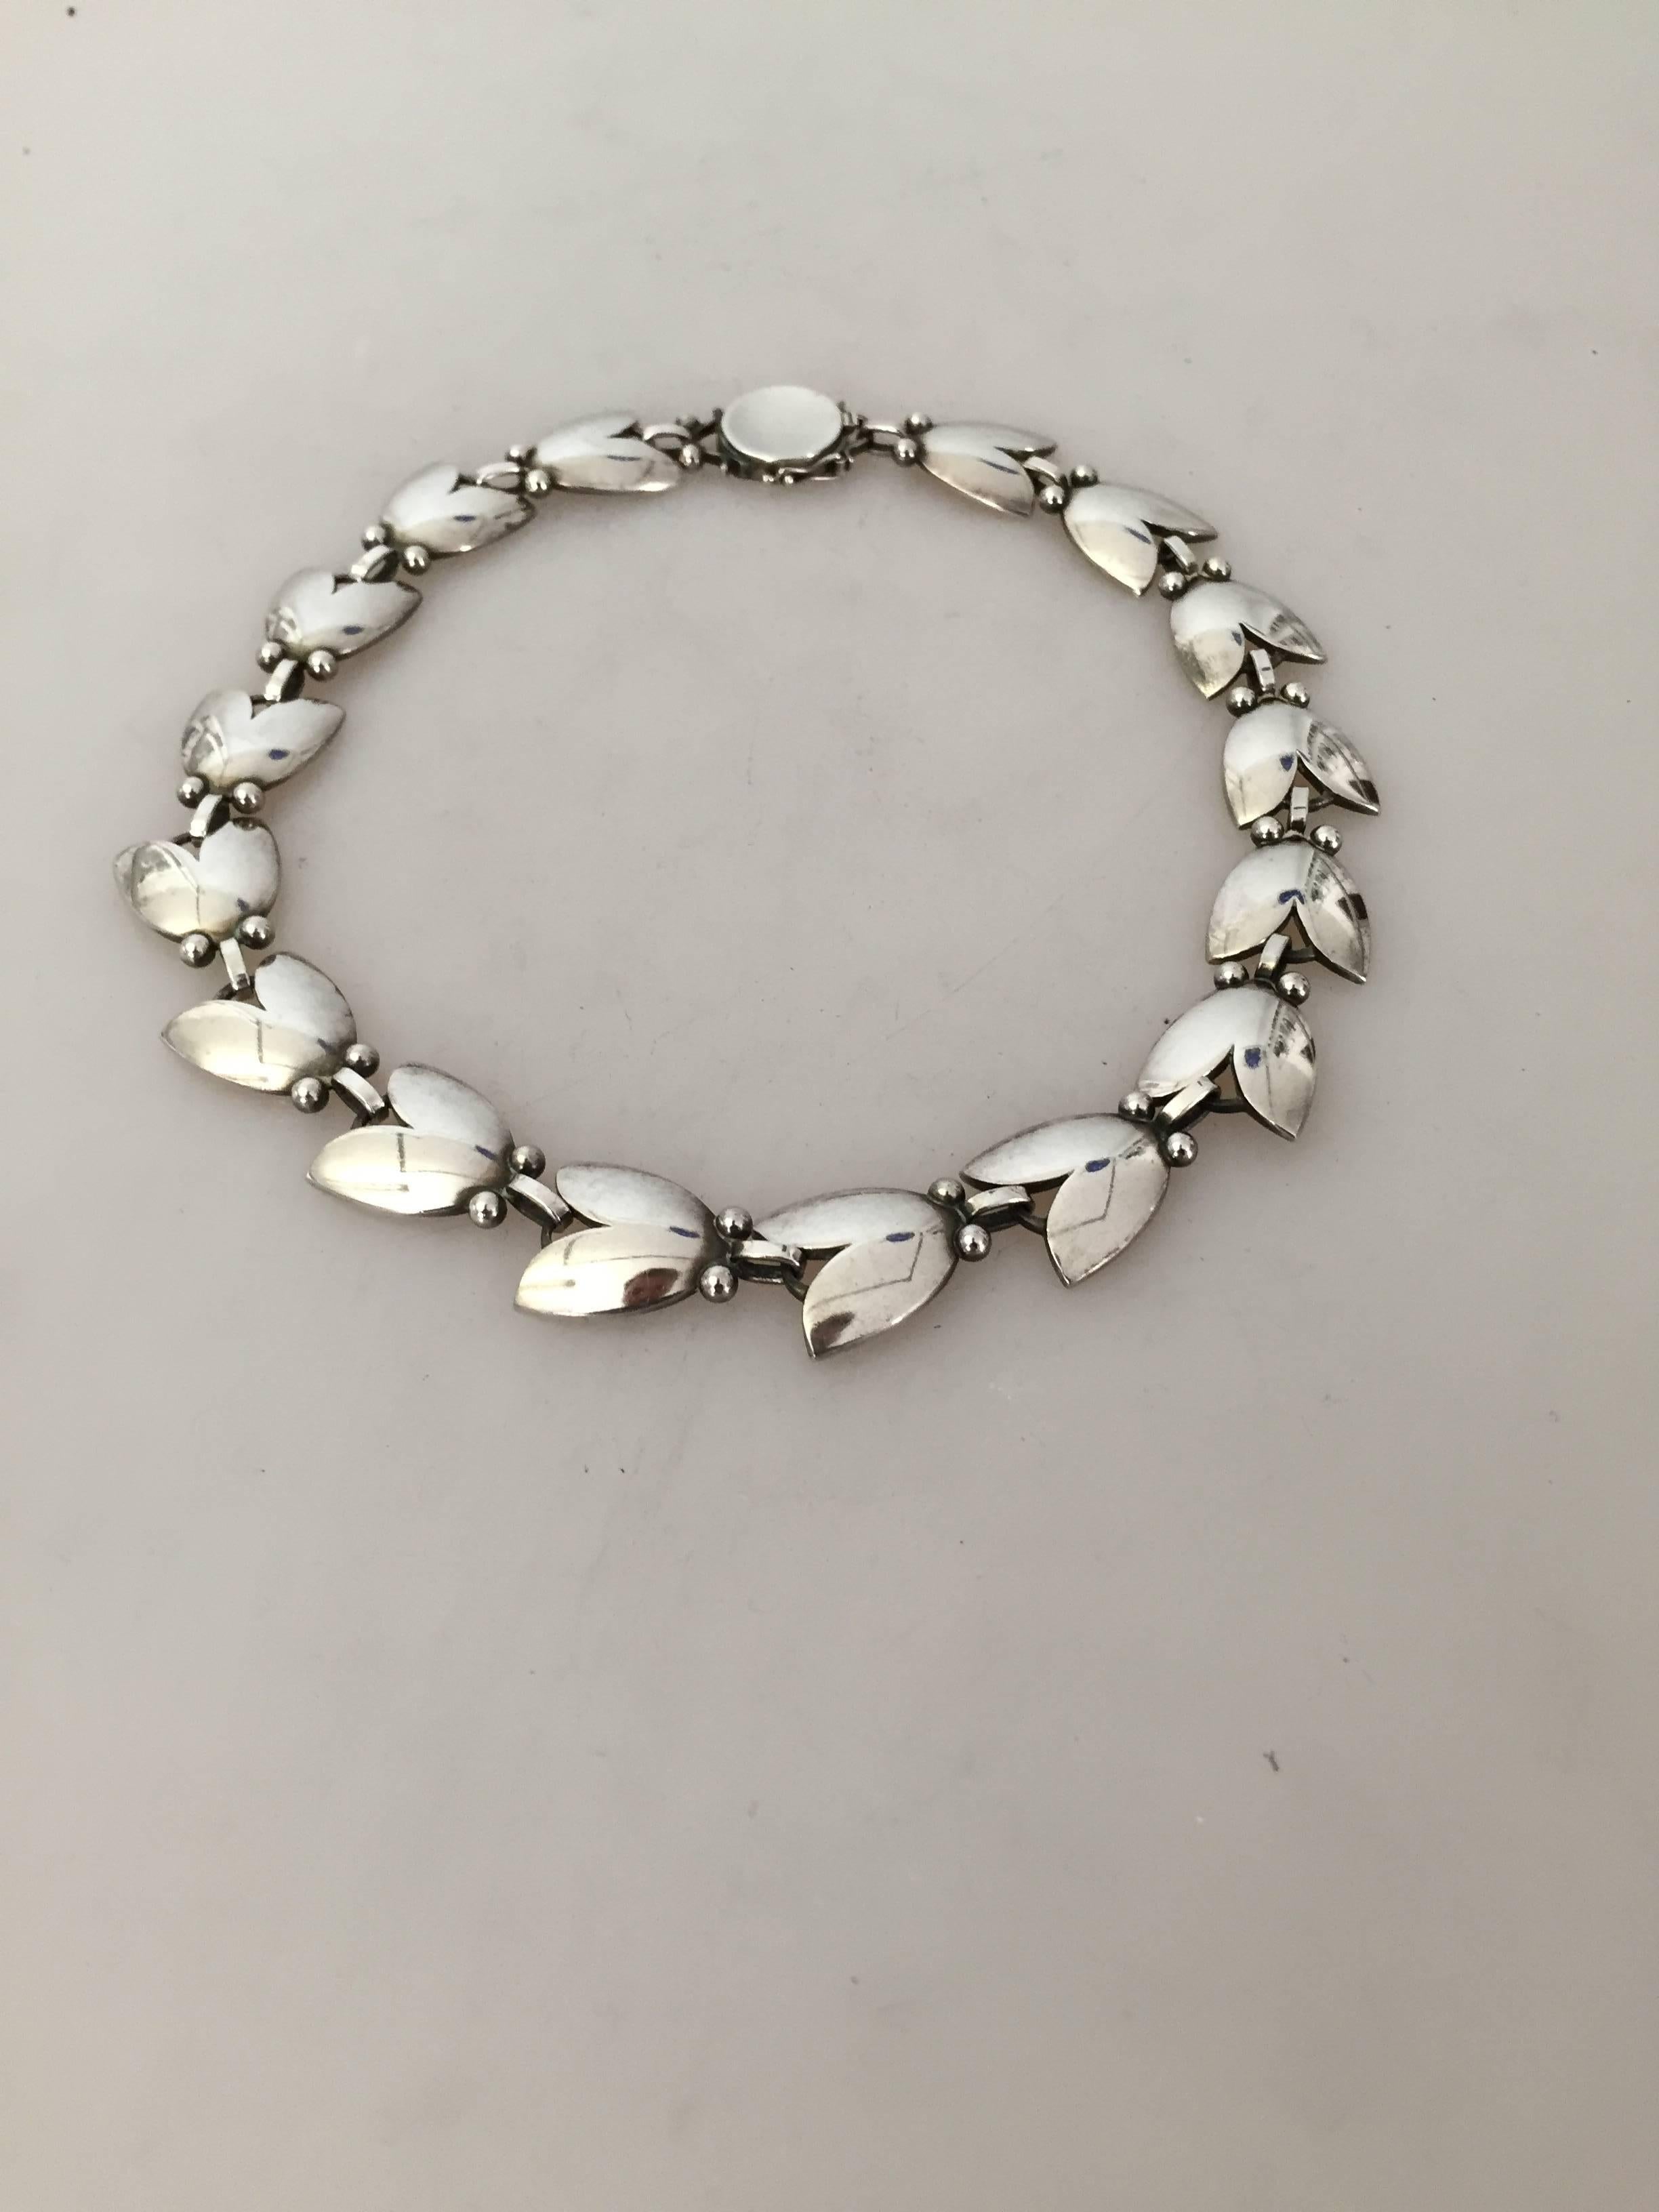 Georg Jensen sterling silver Nordic bell choker necklace #66. Designed in 1952 this beautiful necklace consists of 17 links and measures 39 cm (15 23/64